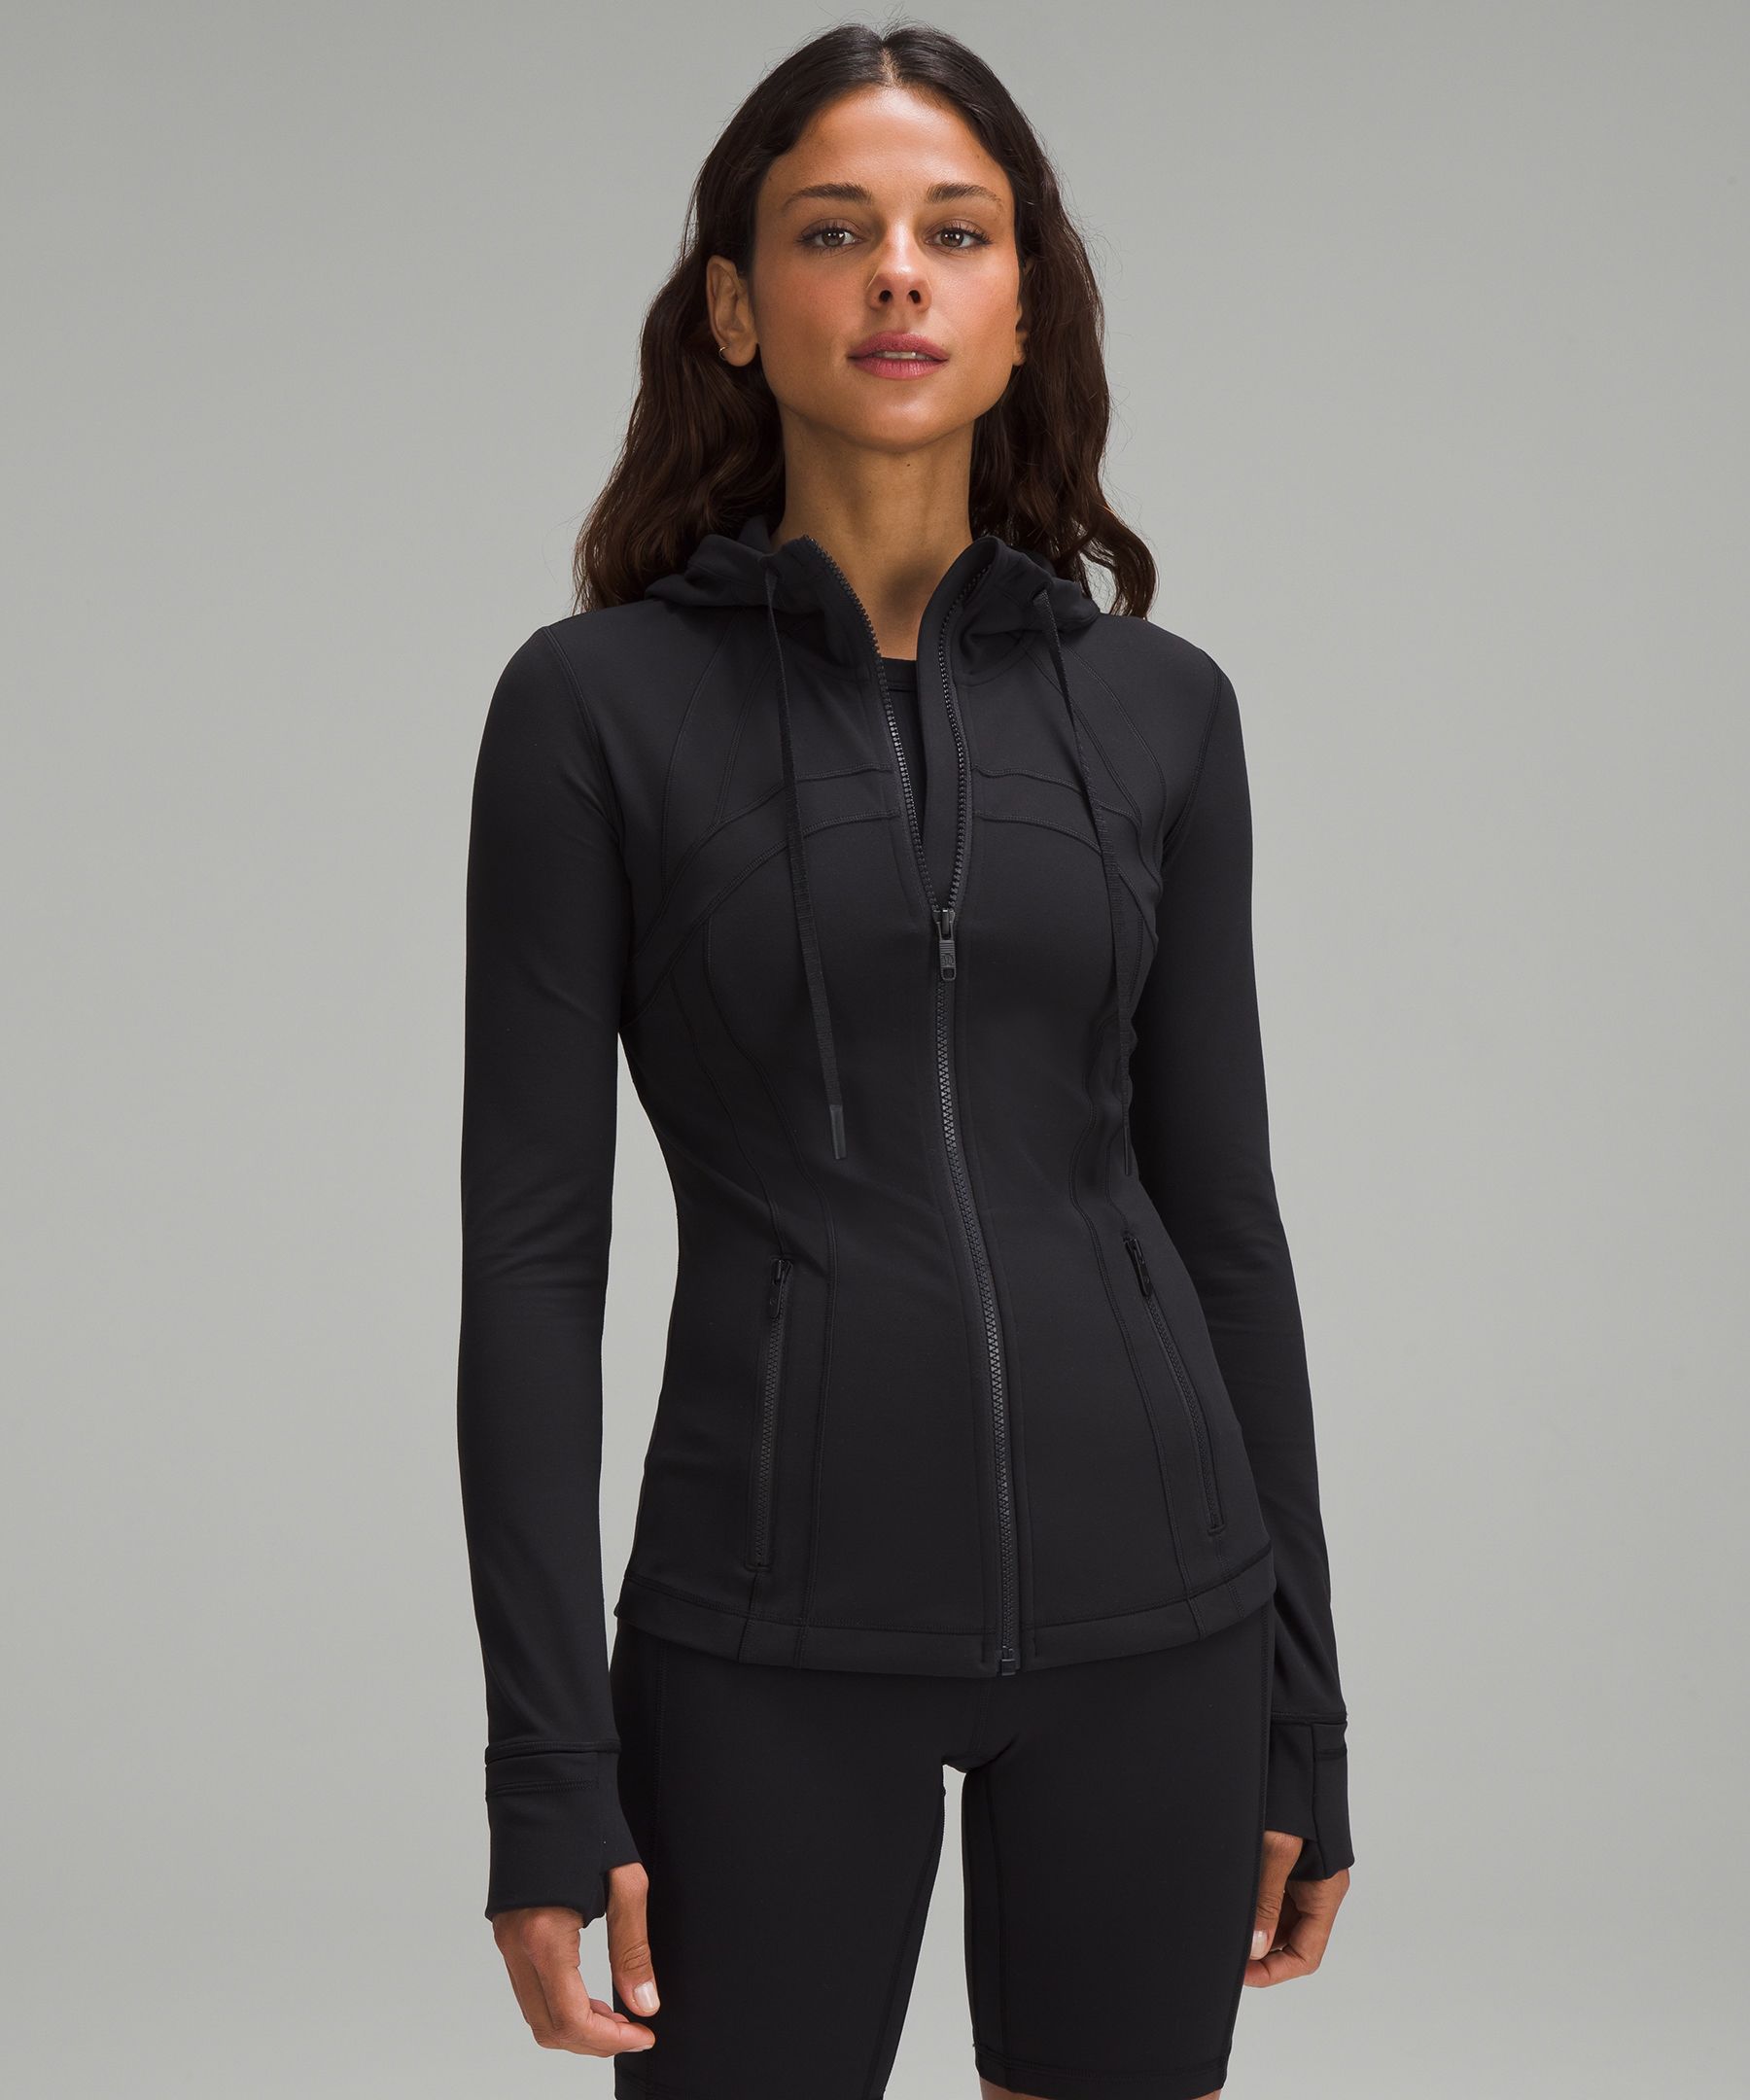 lululemon Define Jacket review: Why it lives up to the hype